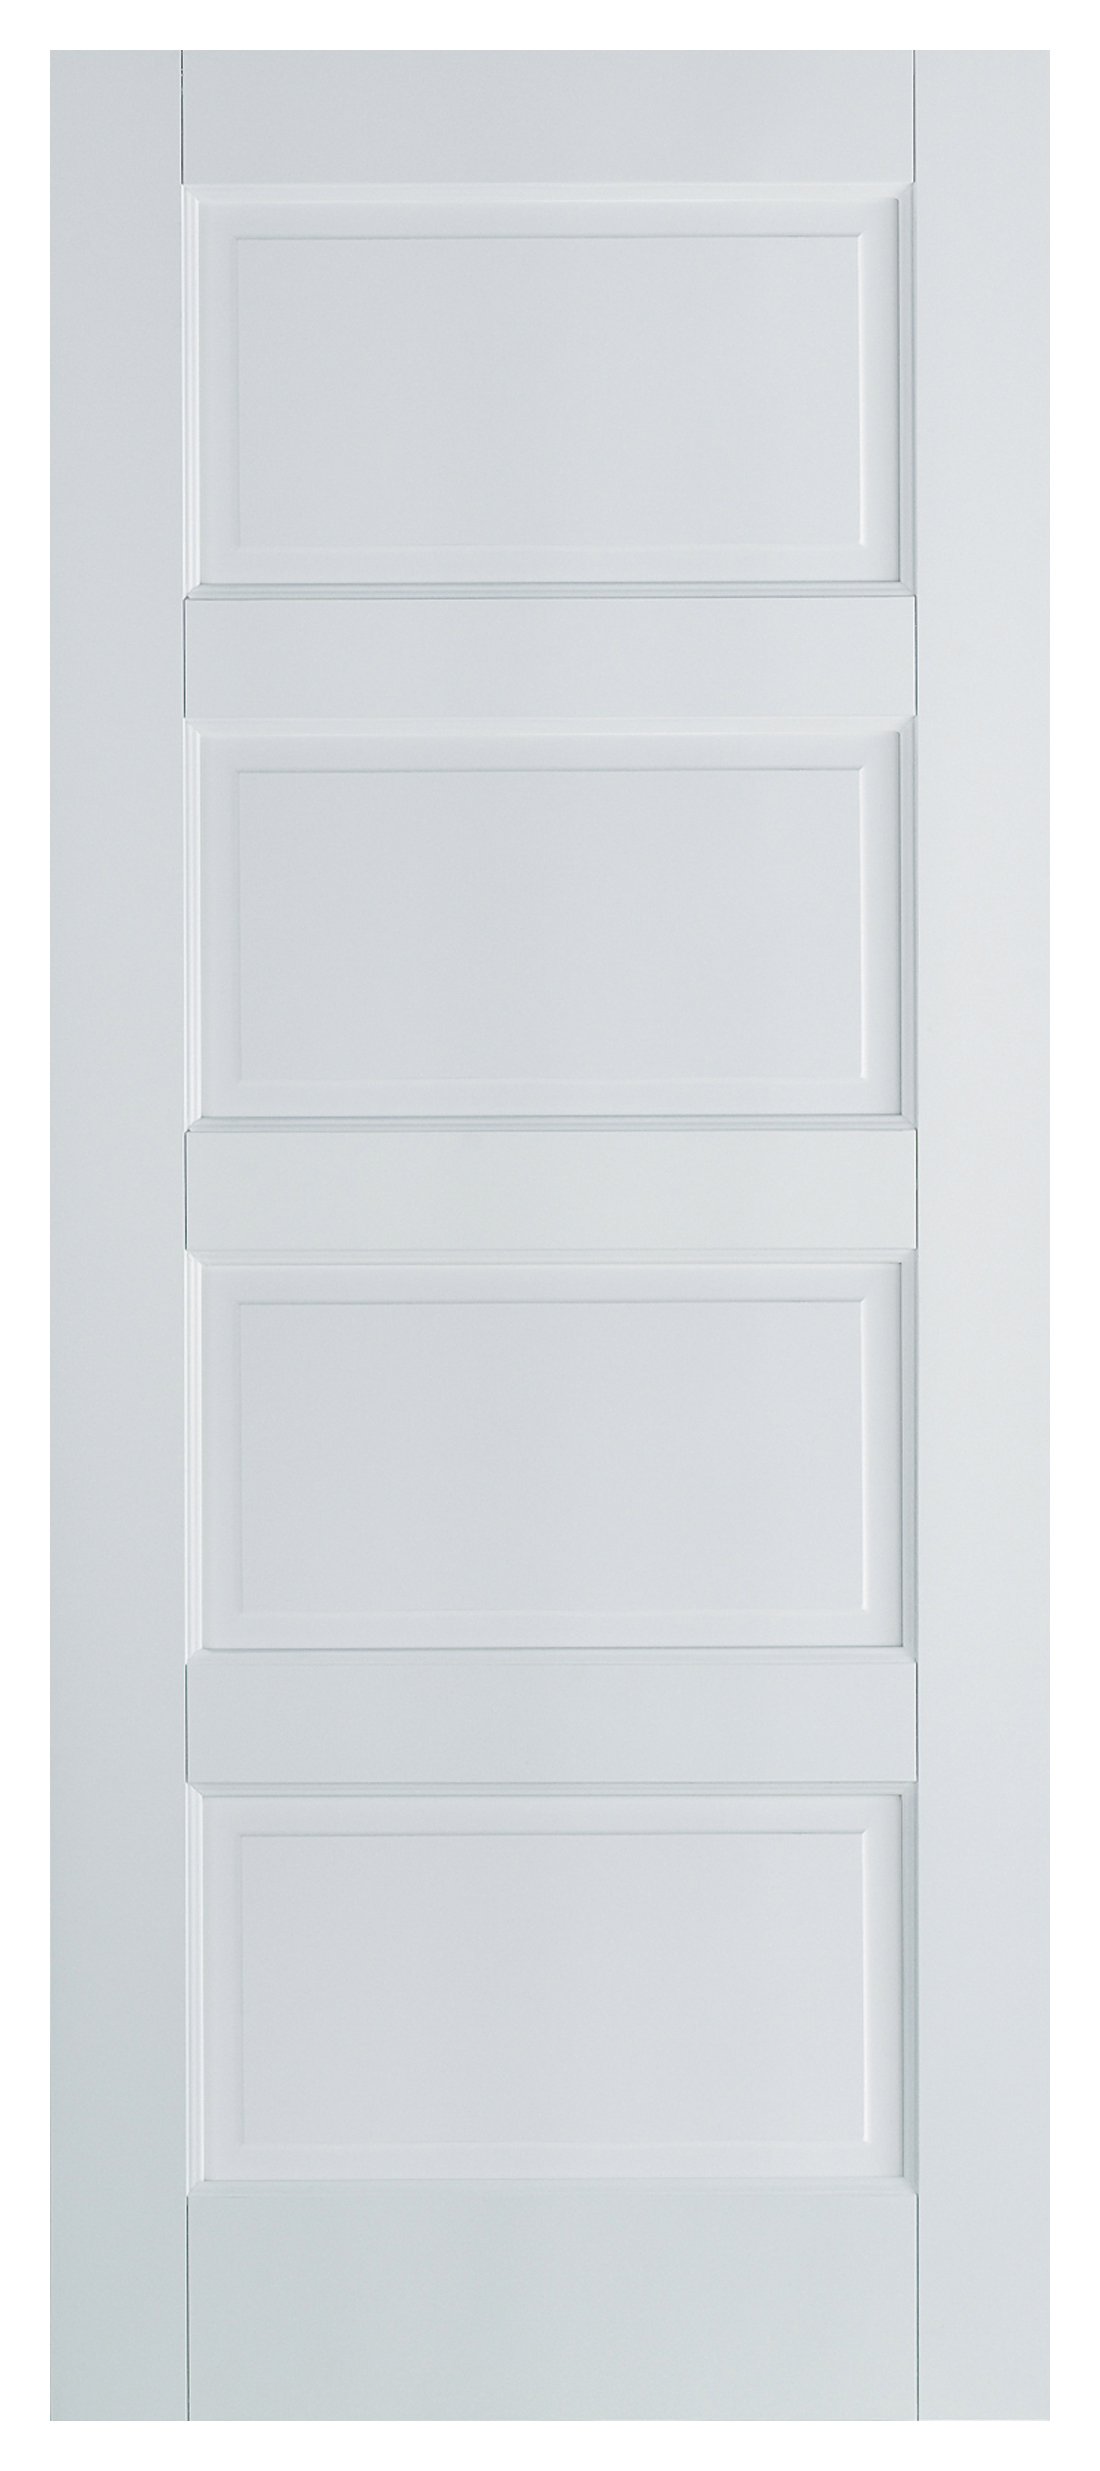 Image of LPD Internal Contemporary 4 Panel Primed White FD30 Fire Door - 686 x 1981mm